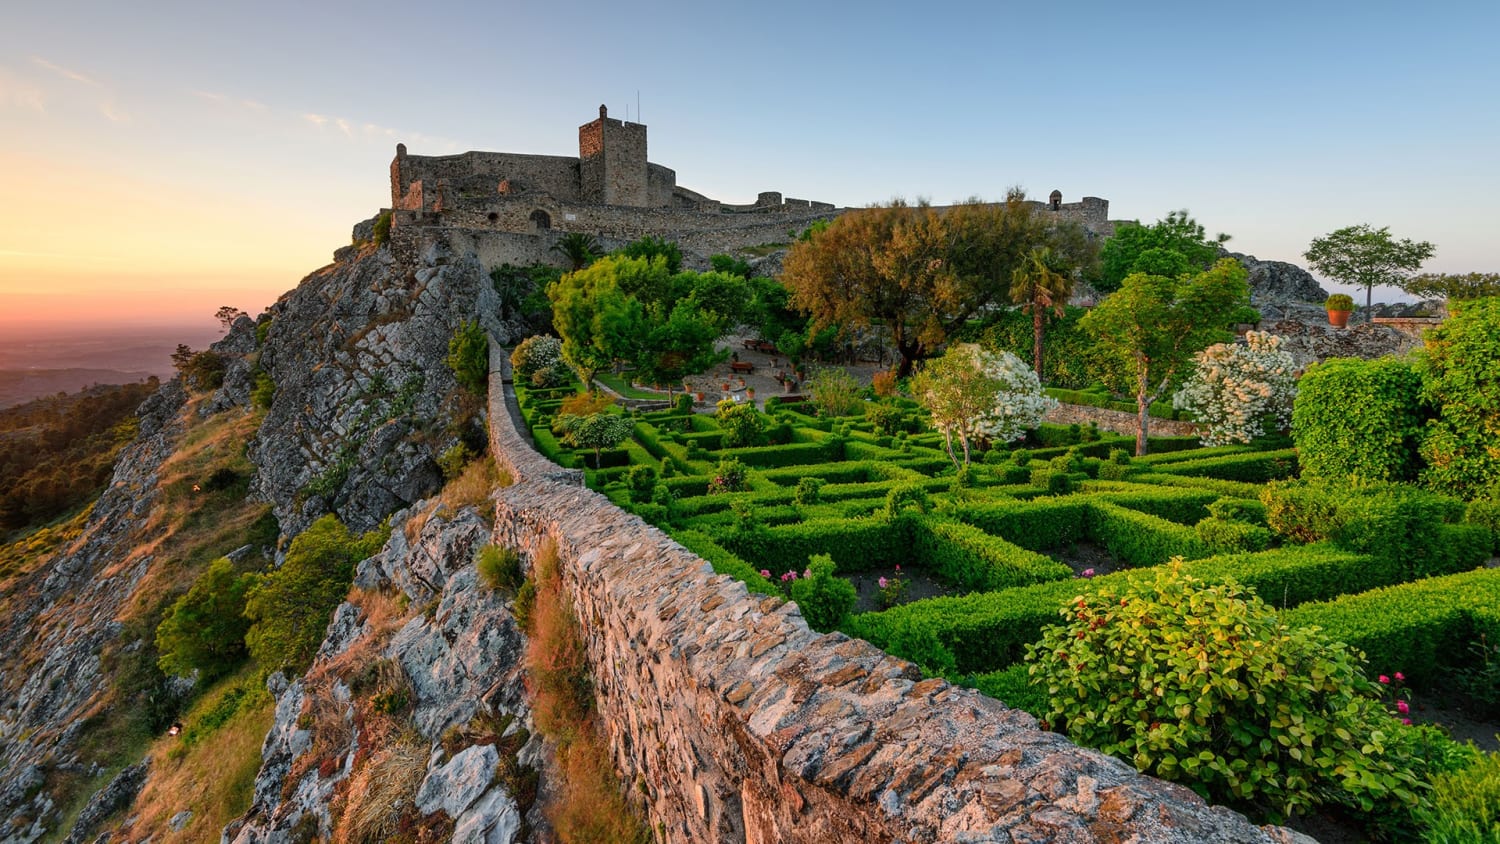 Fancy castle at Marvao, Portugal - Credits: ARoxoPT